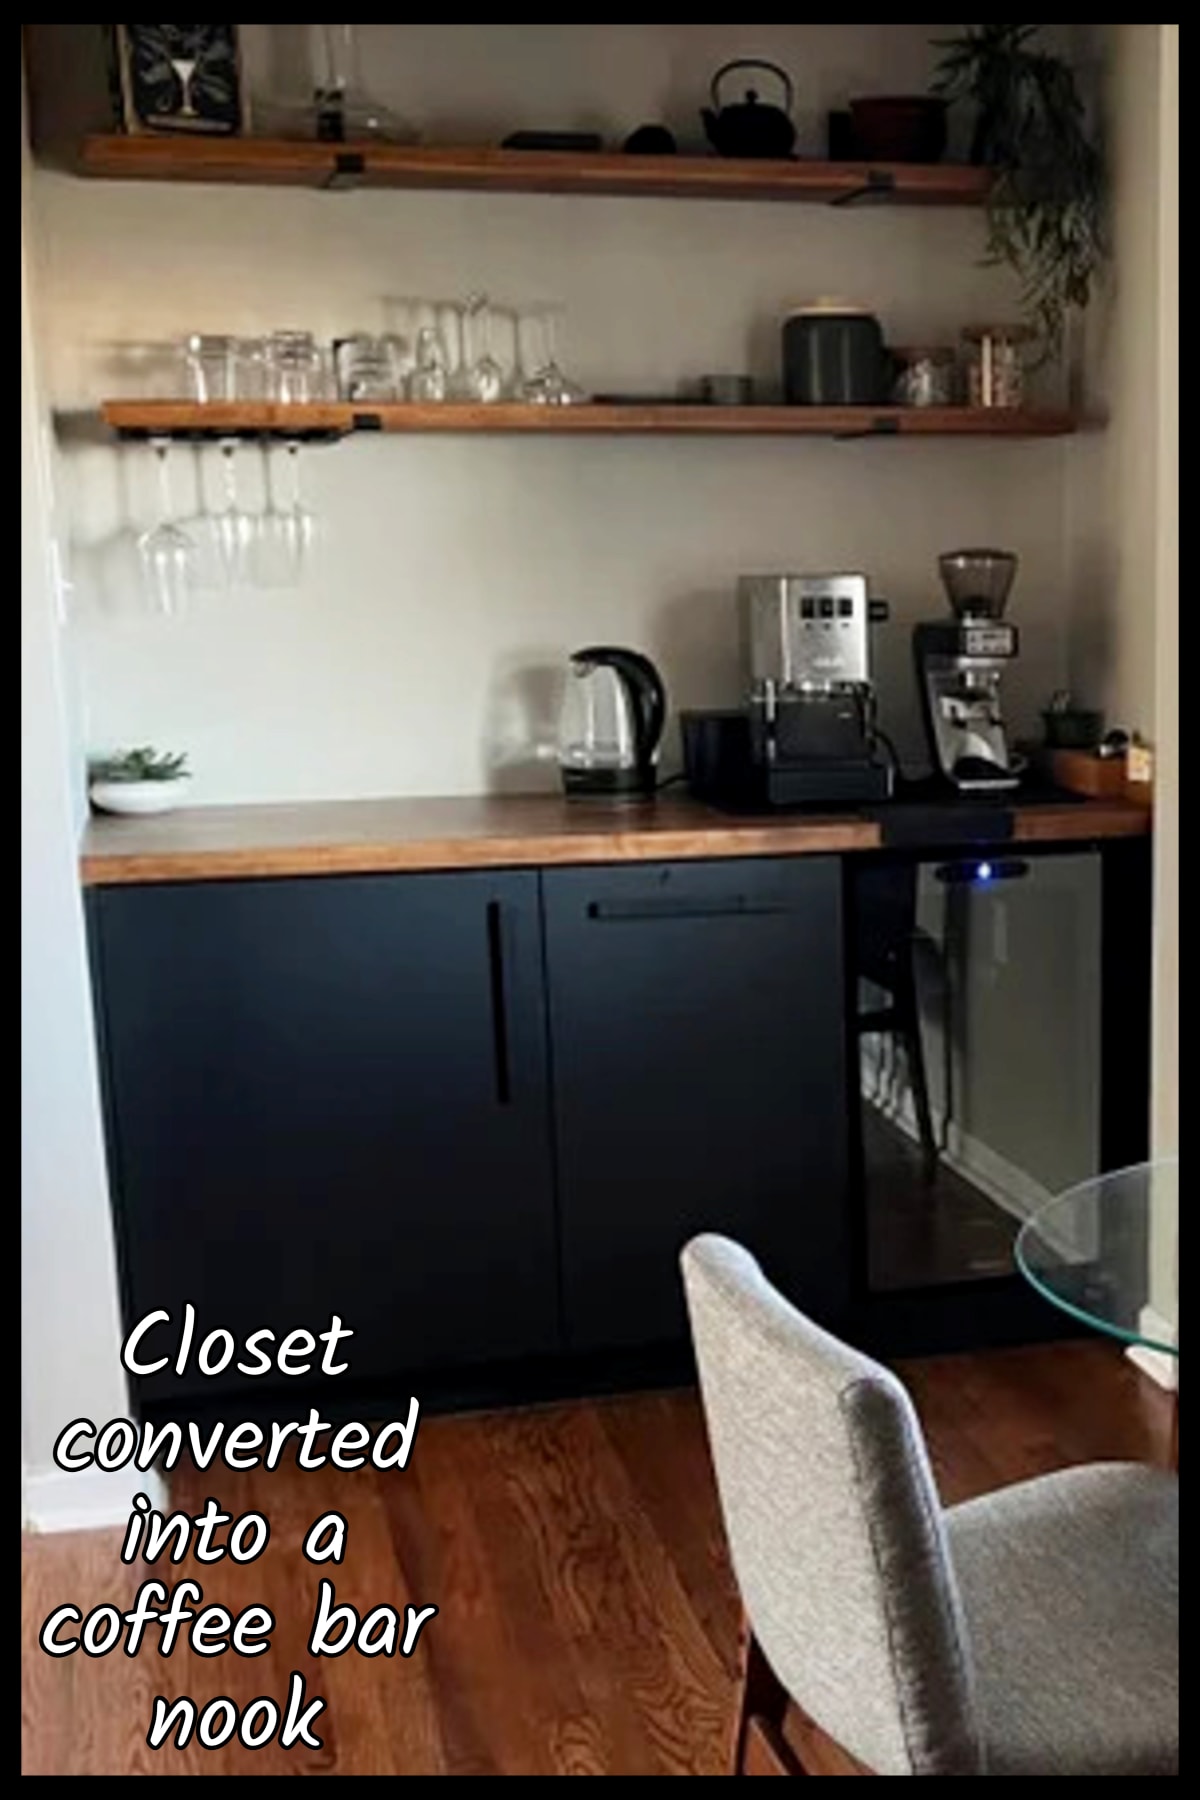 closet converted into coffee bar nook in breakfast area off the small kitchen